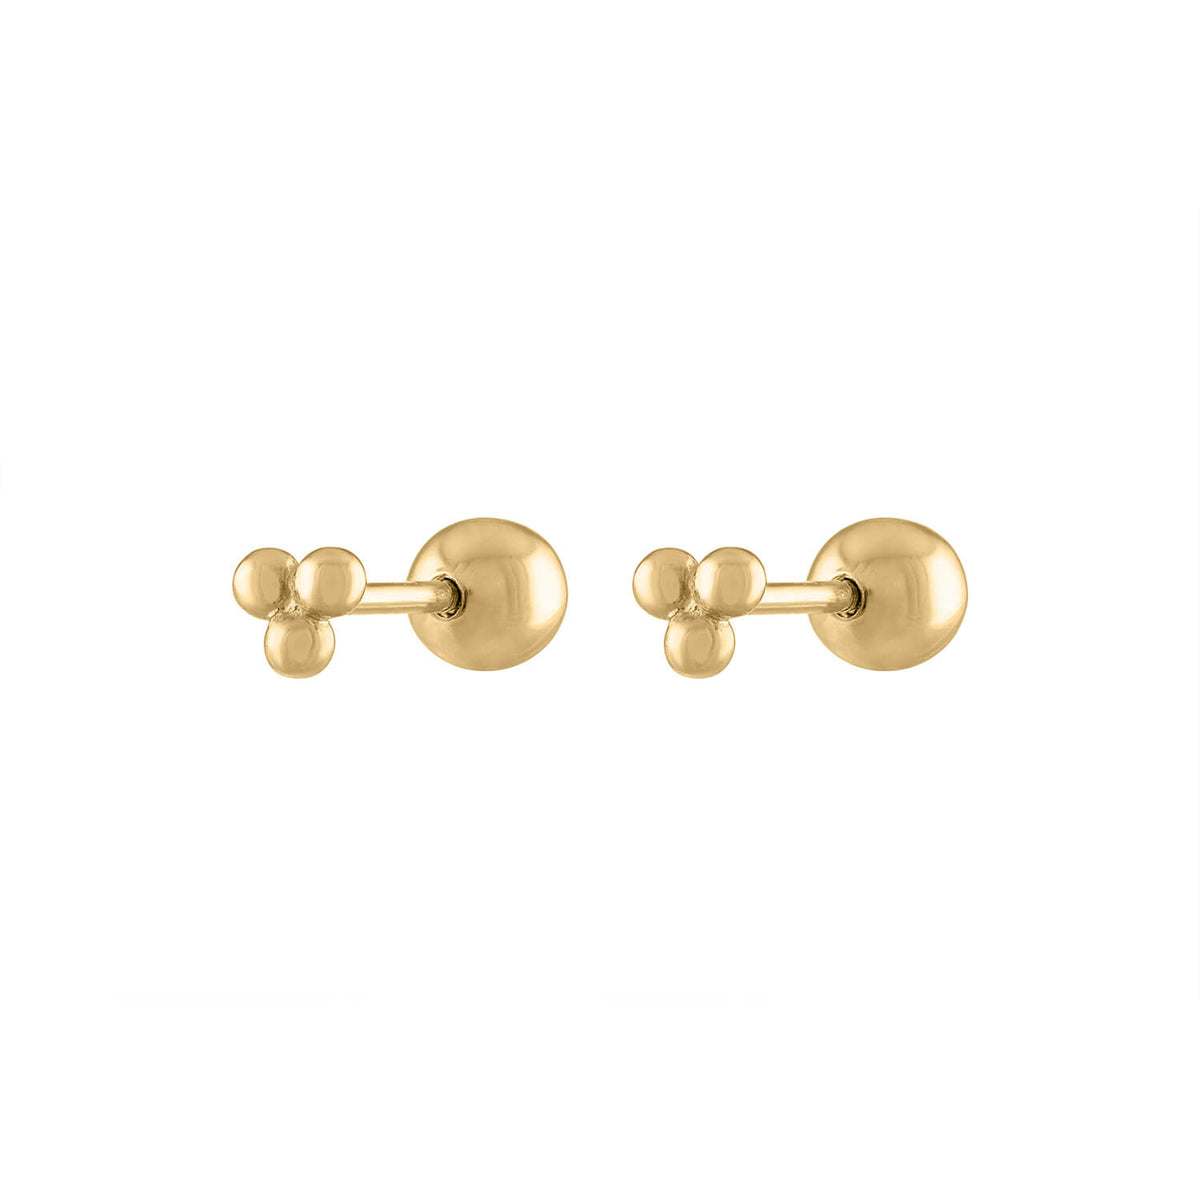 Girls' Replacement Pair Screw Backs Sterling Silver Gold Plated